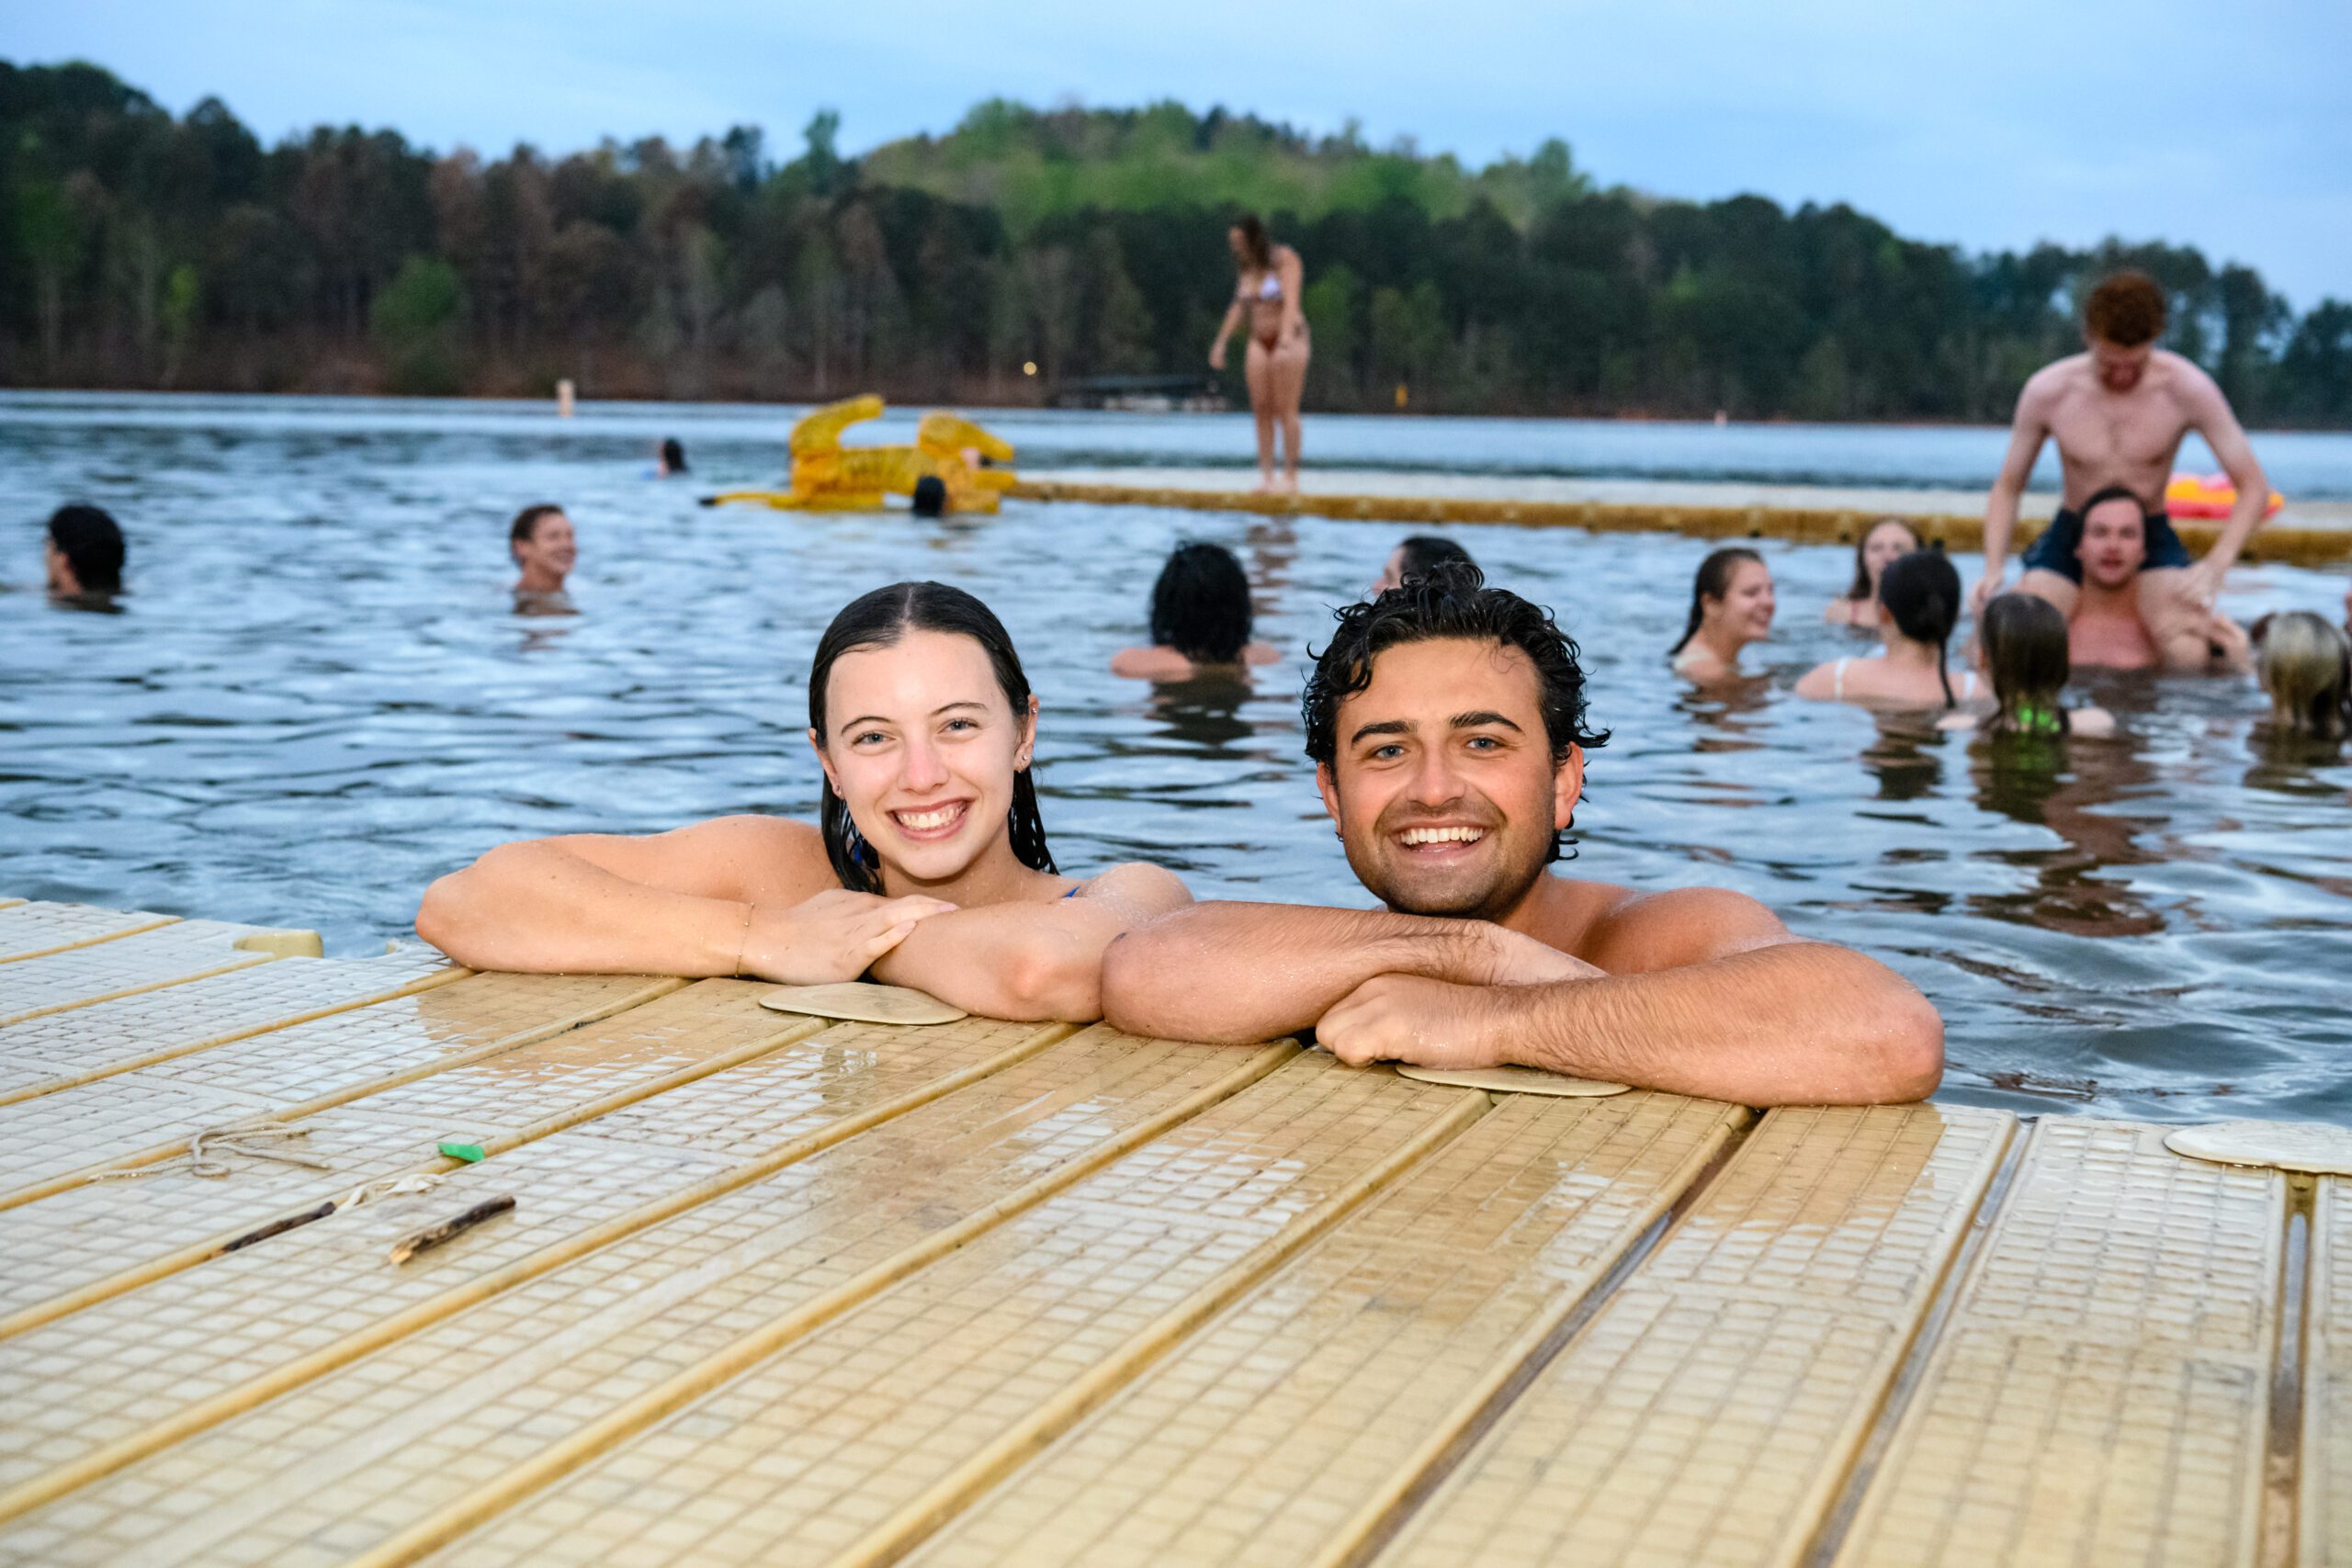 A young woman and man are in the water with their arms on a dock while other students swim in the background.